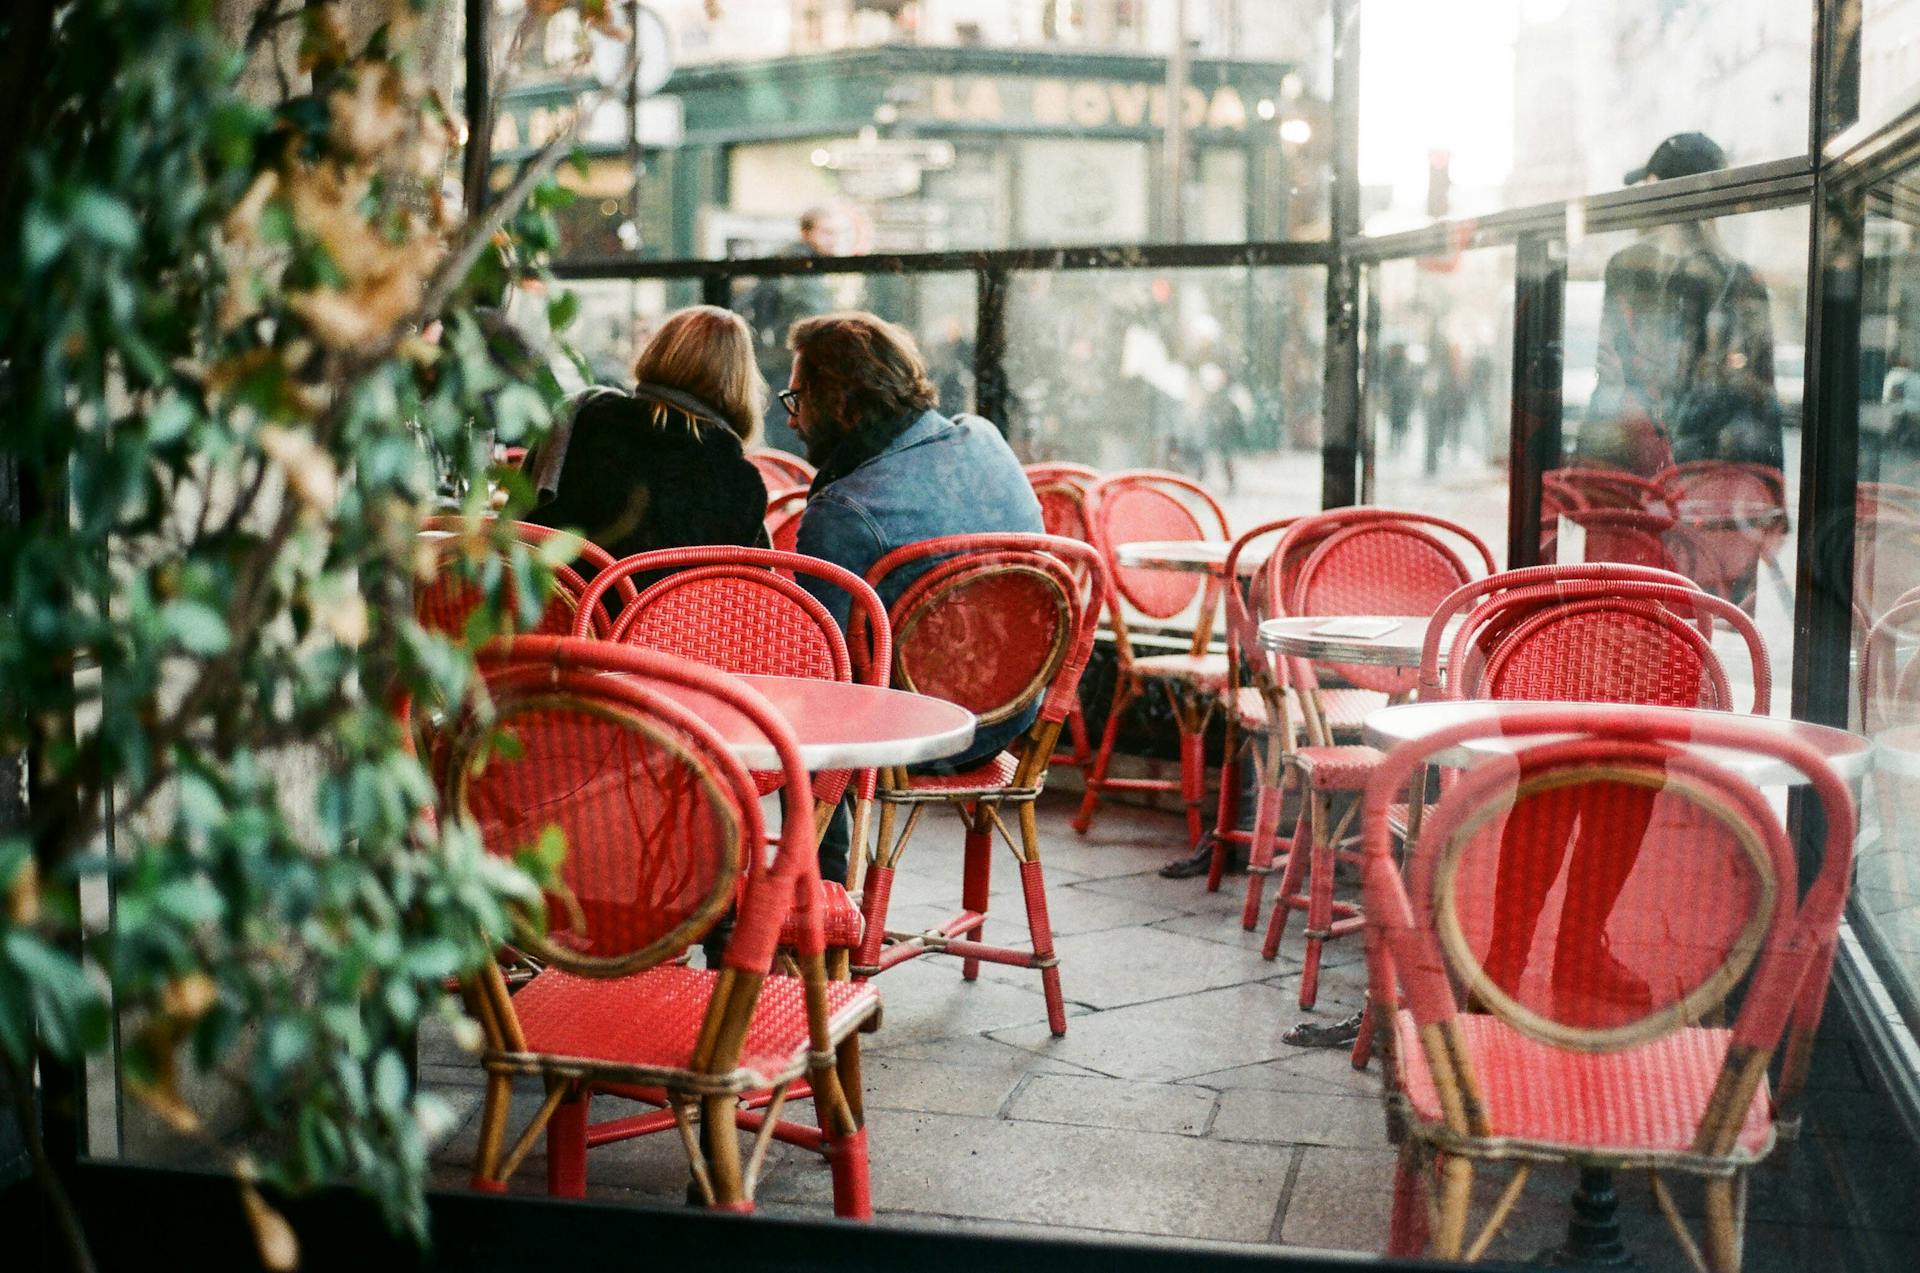 A man and woman in a cafe | Source: Pexels